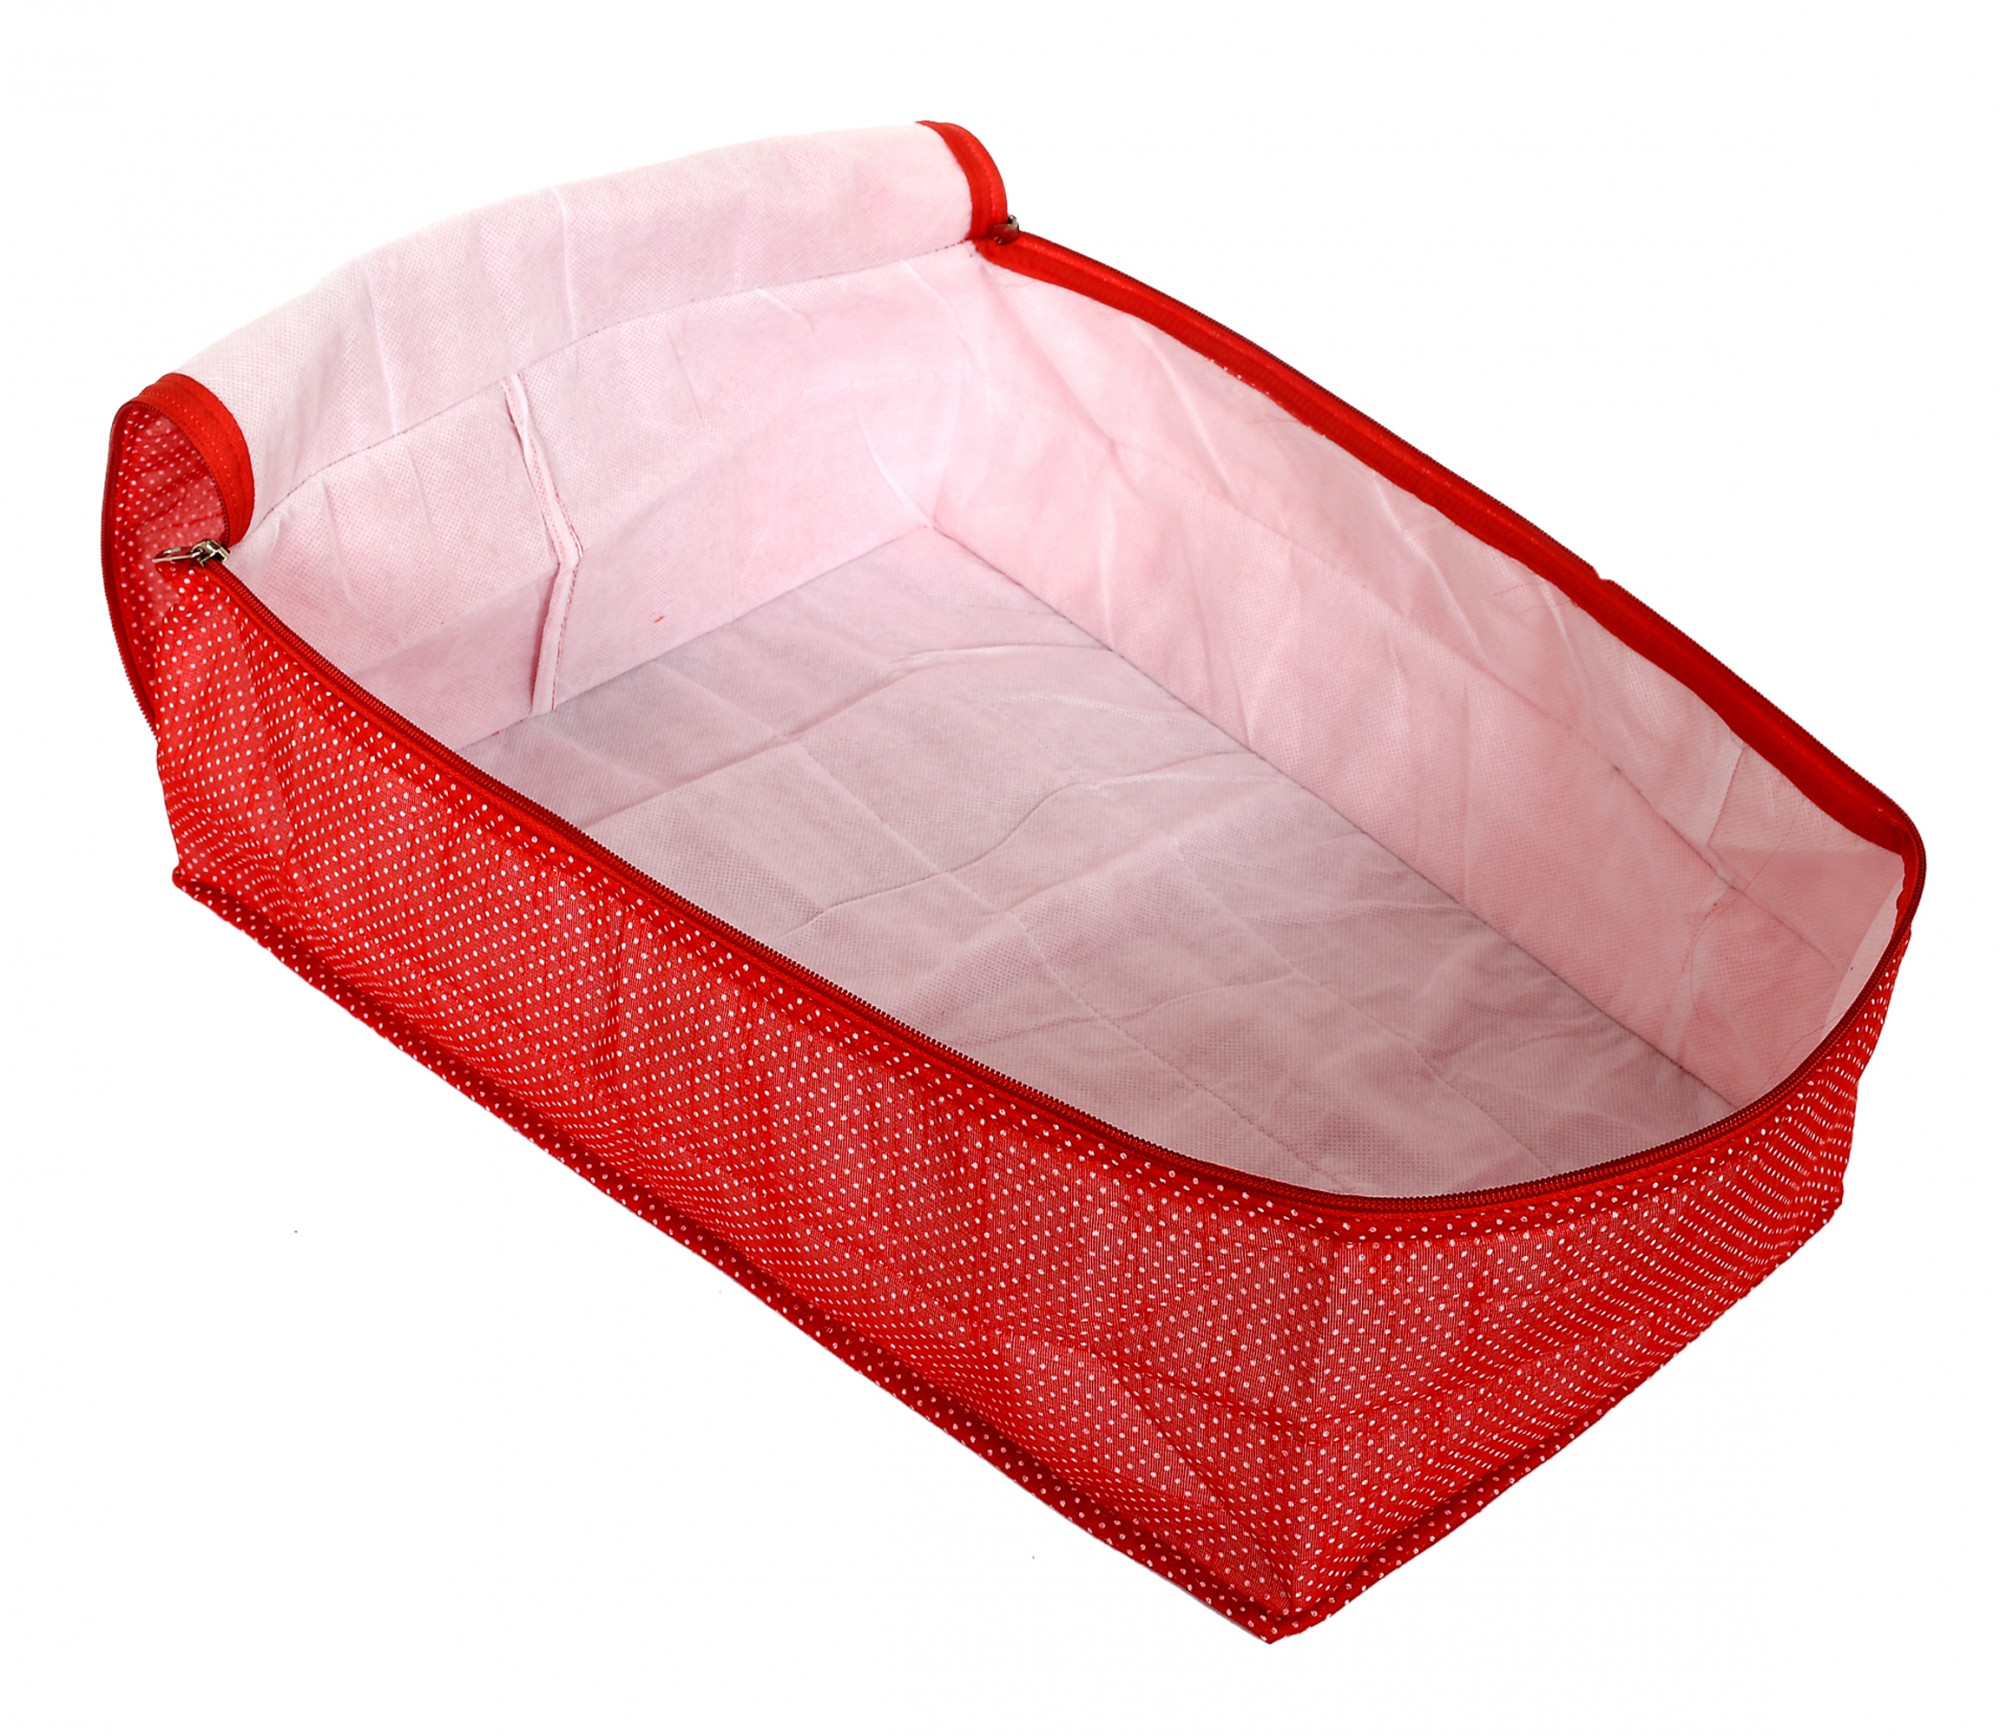 Kuber Industries Dot Printed Petticoat Cover Bag/Garment cover/Wardrobe Clothes Organizer (Red)